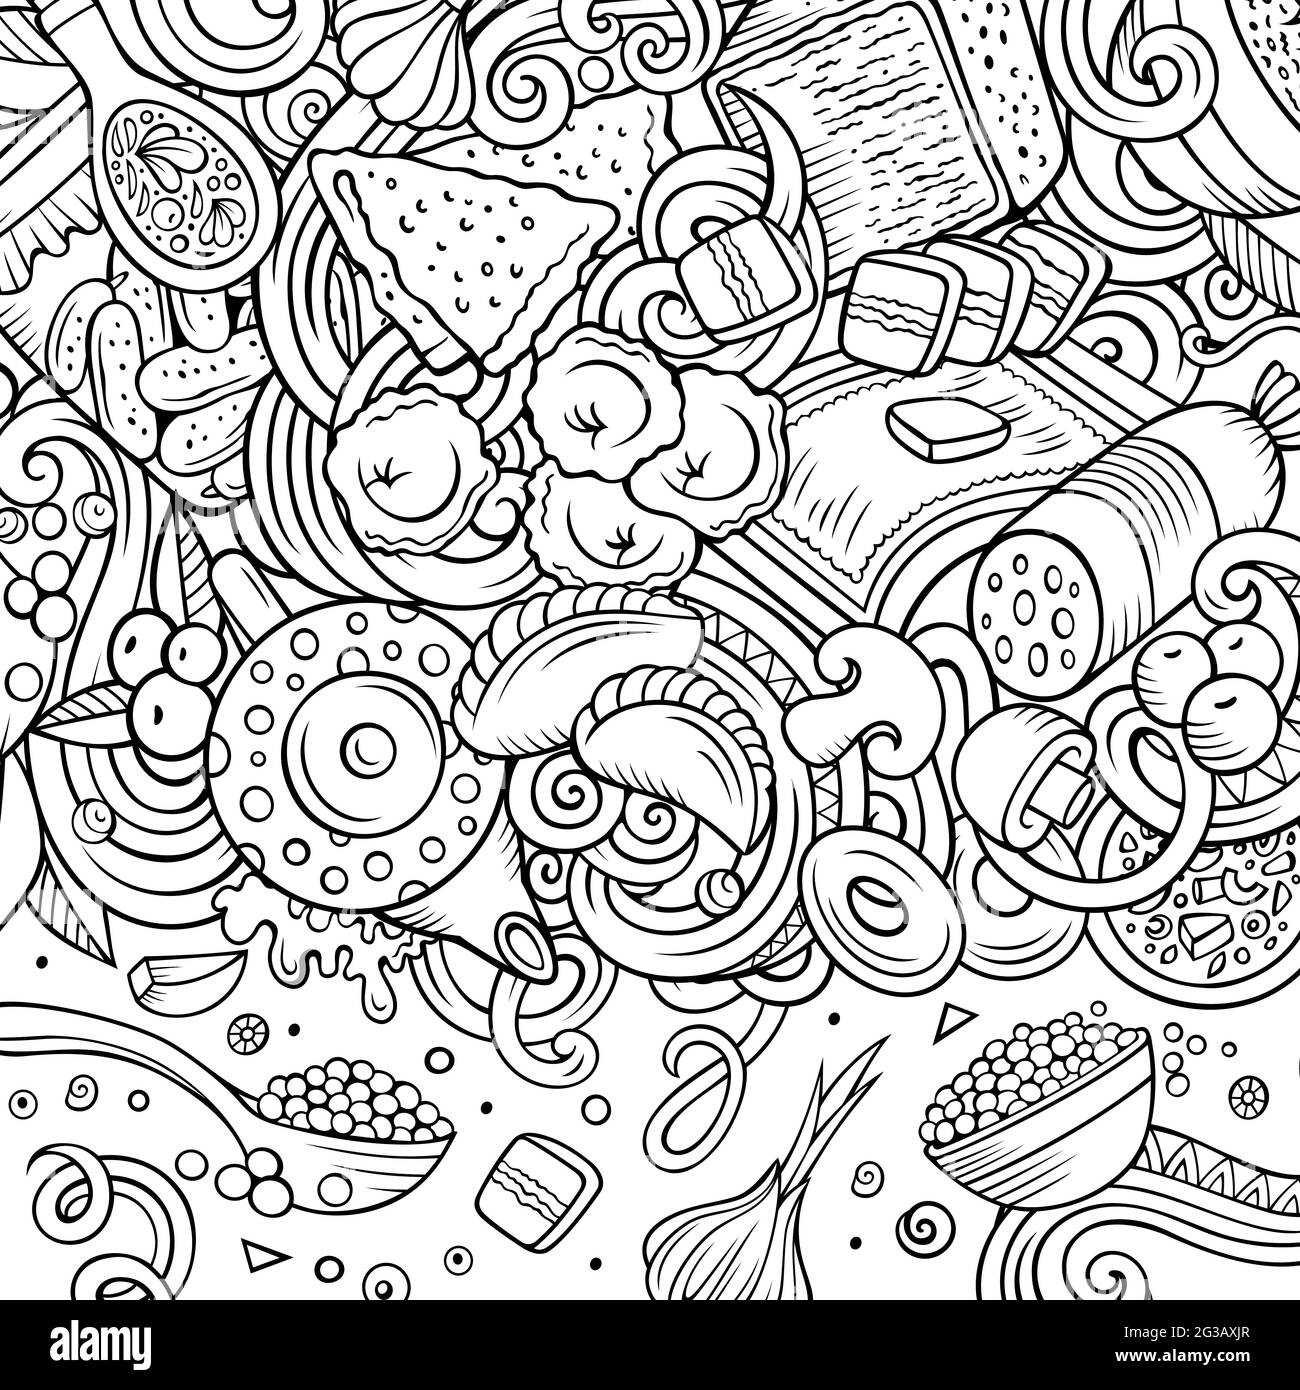 Cartoon vector doodles Russian food frame. Line art, detailed, with ...